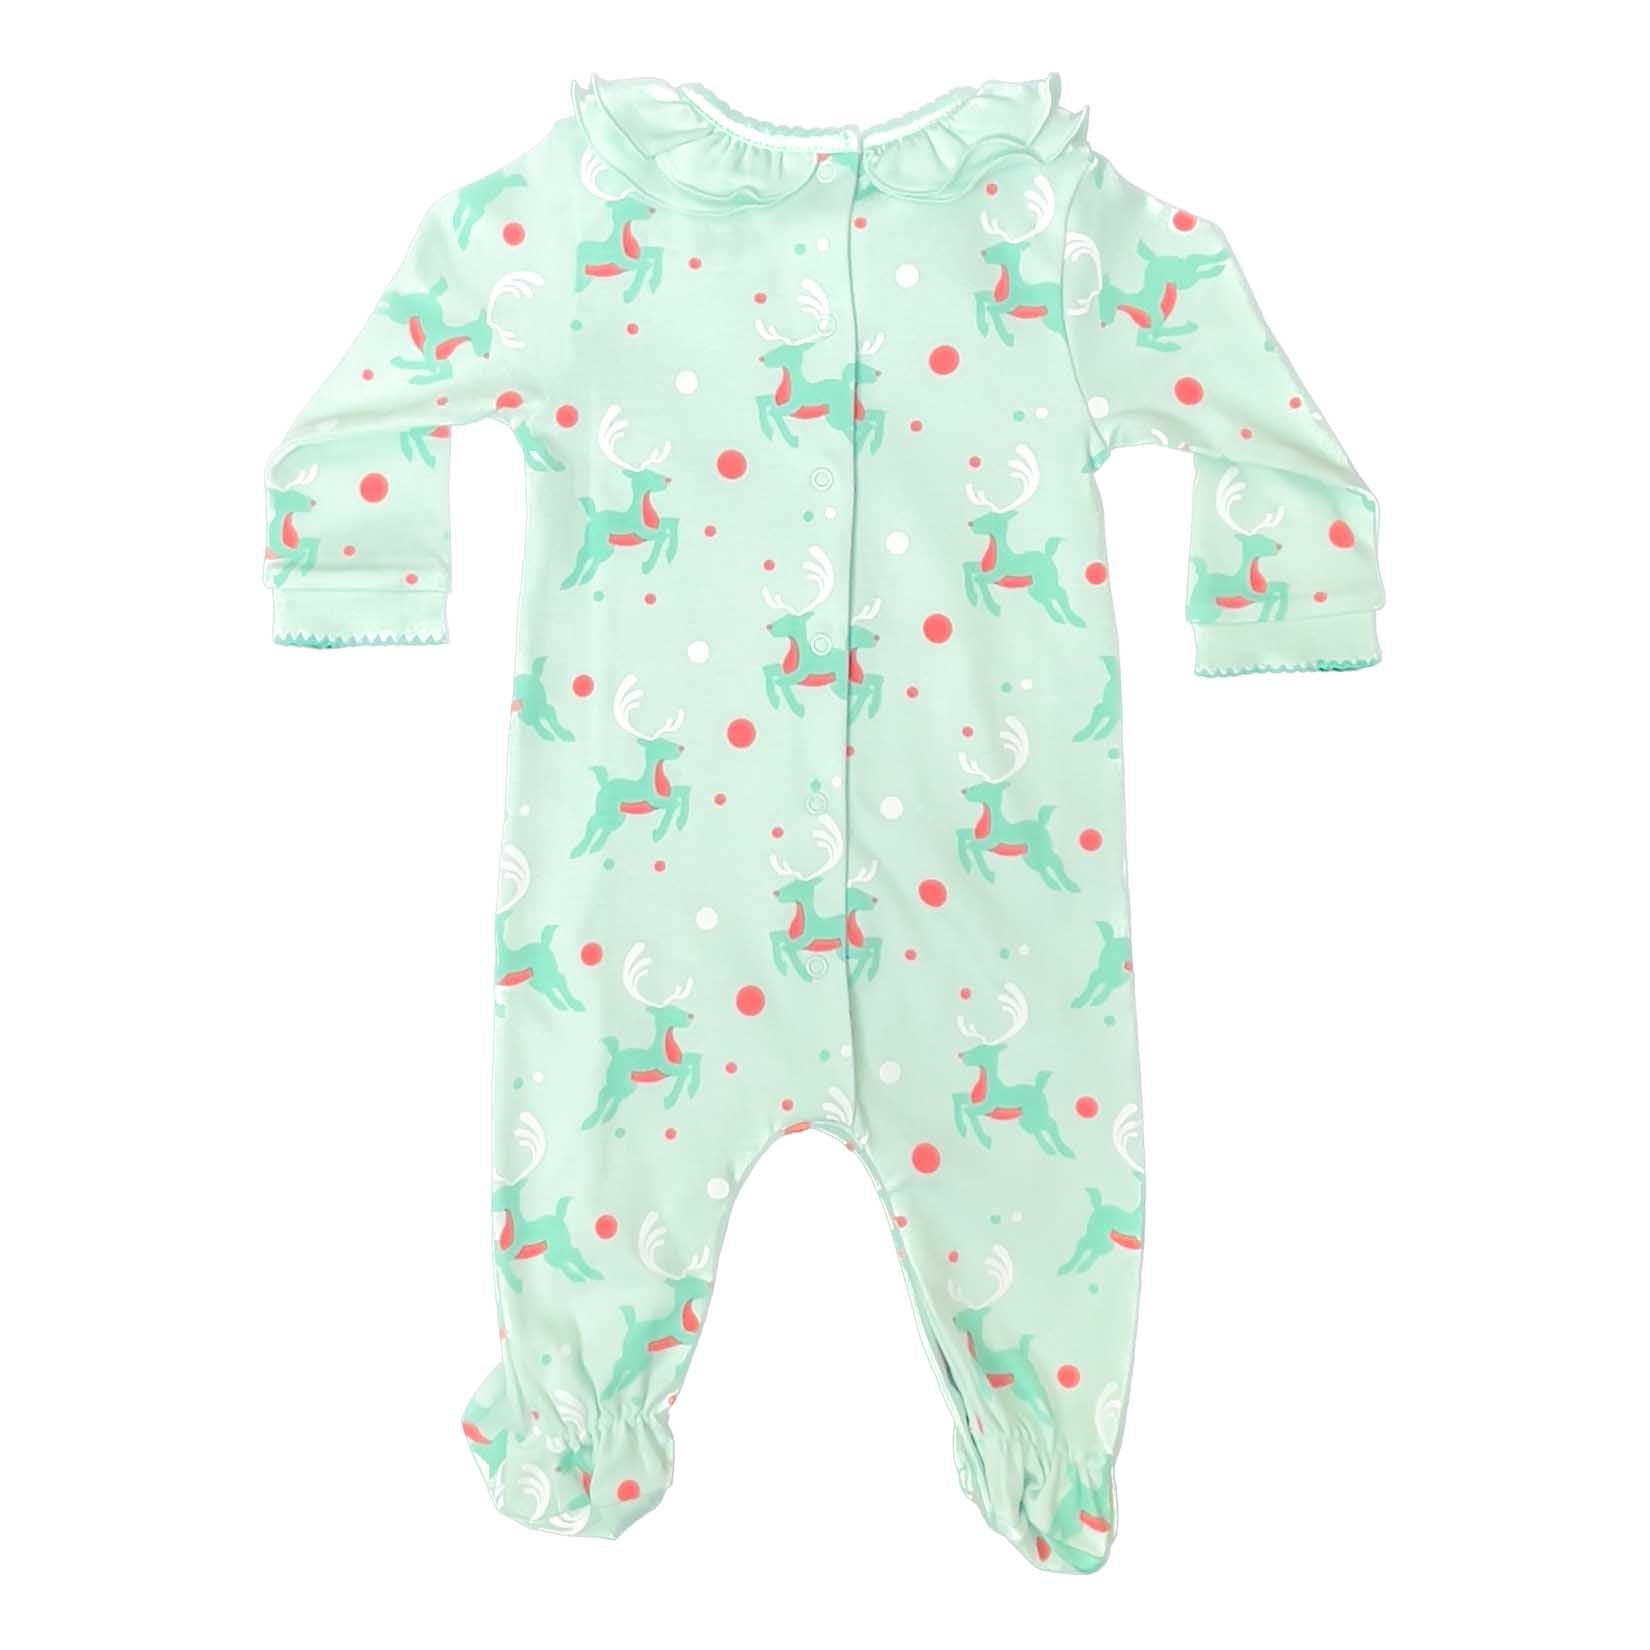 back view of girls playsuit with ruffle collar and green retro reindeer pattern in softest pima